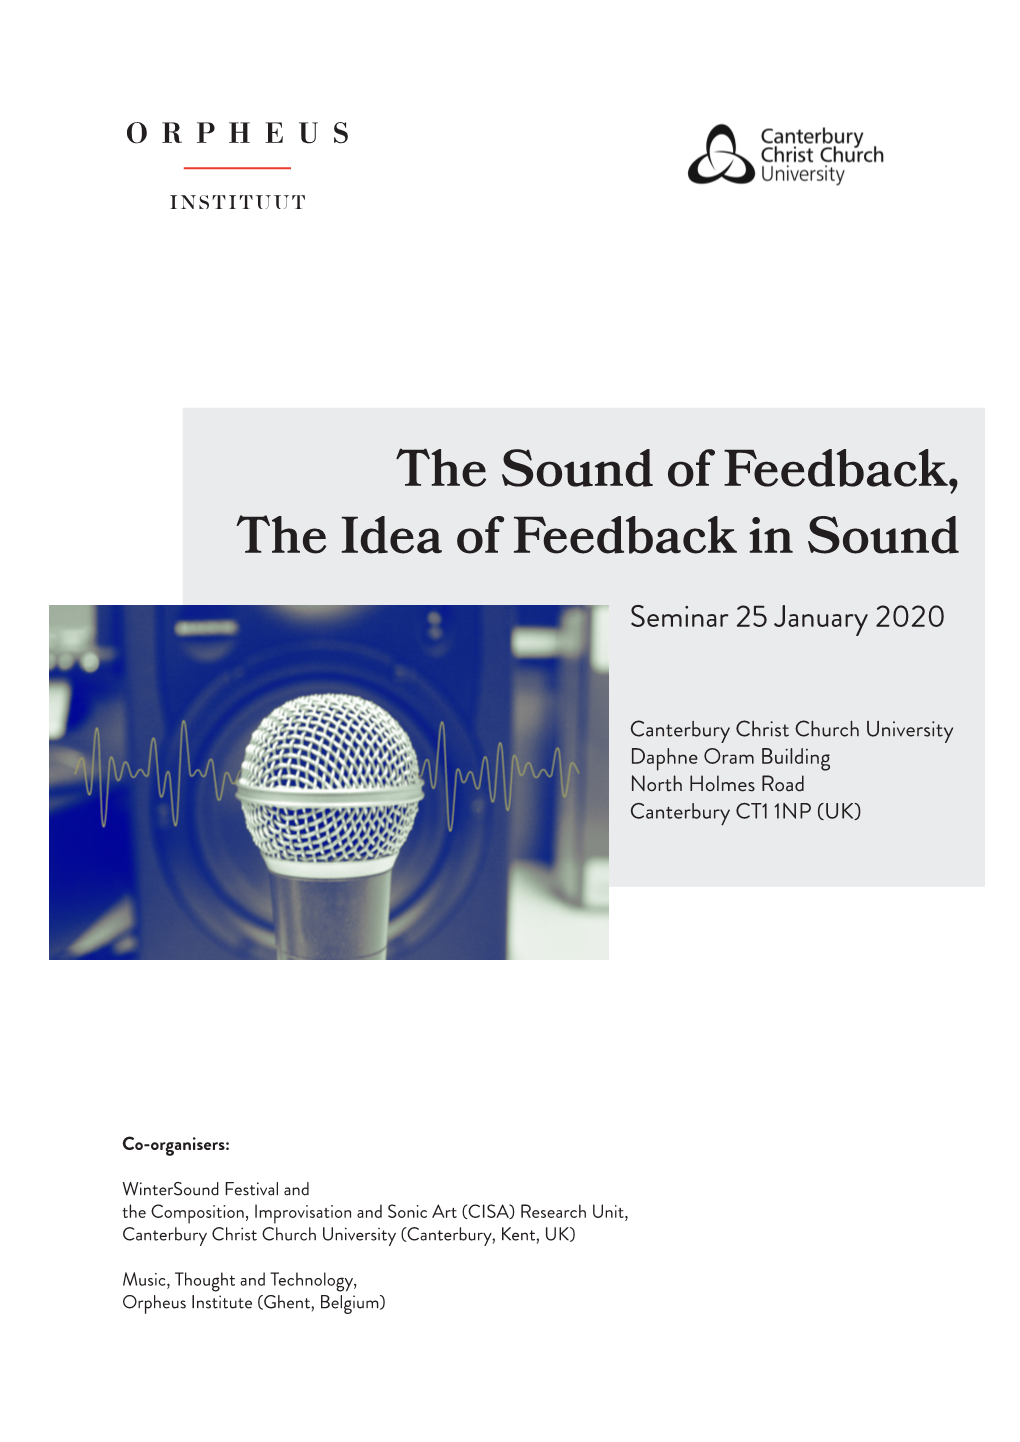 The Sound of Feedback, the Idea of Feedback in Sound Seminar 25 January 2020